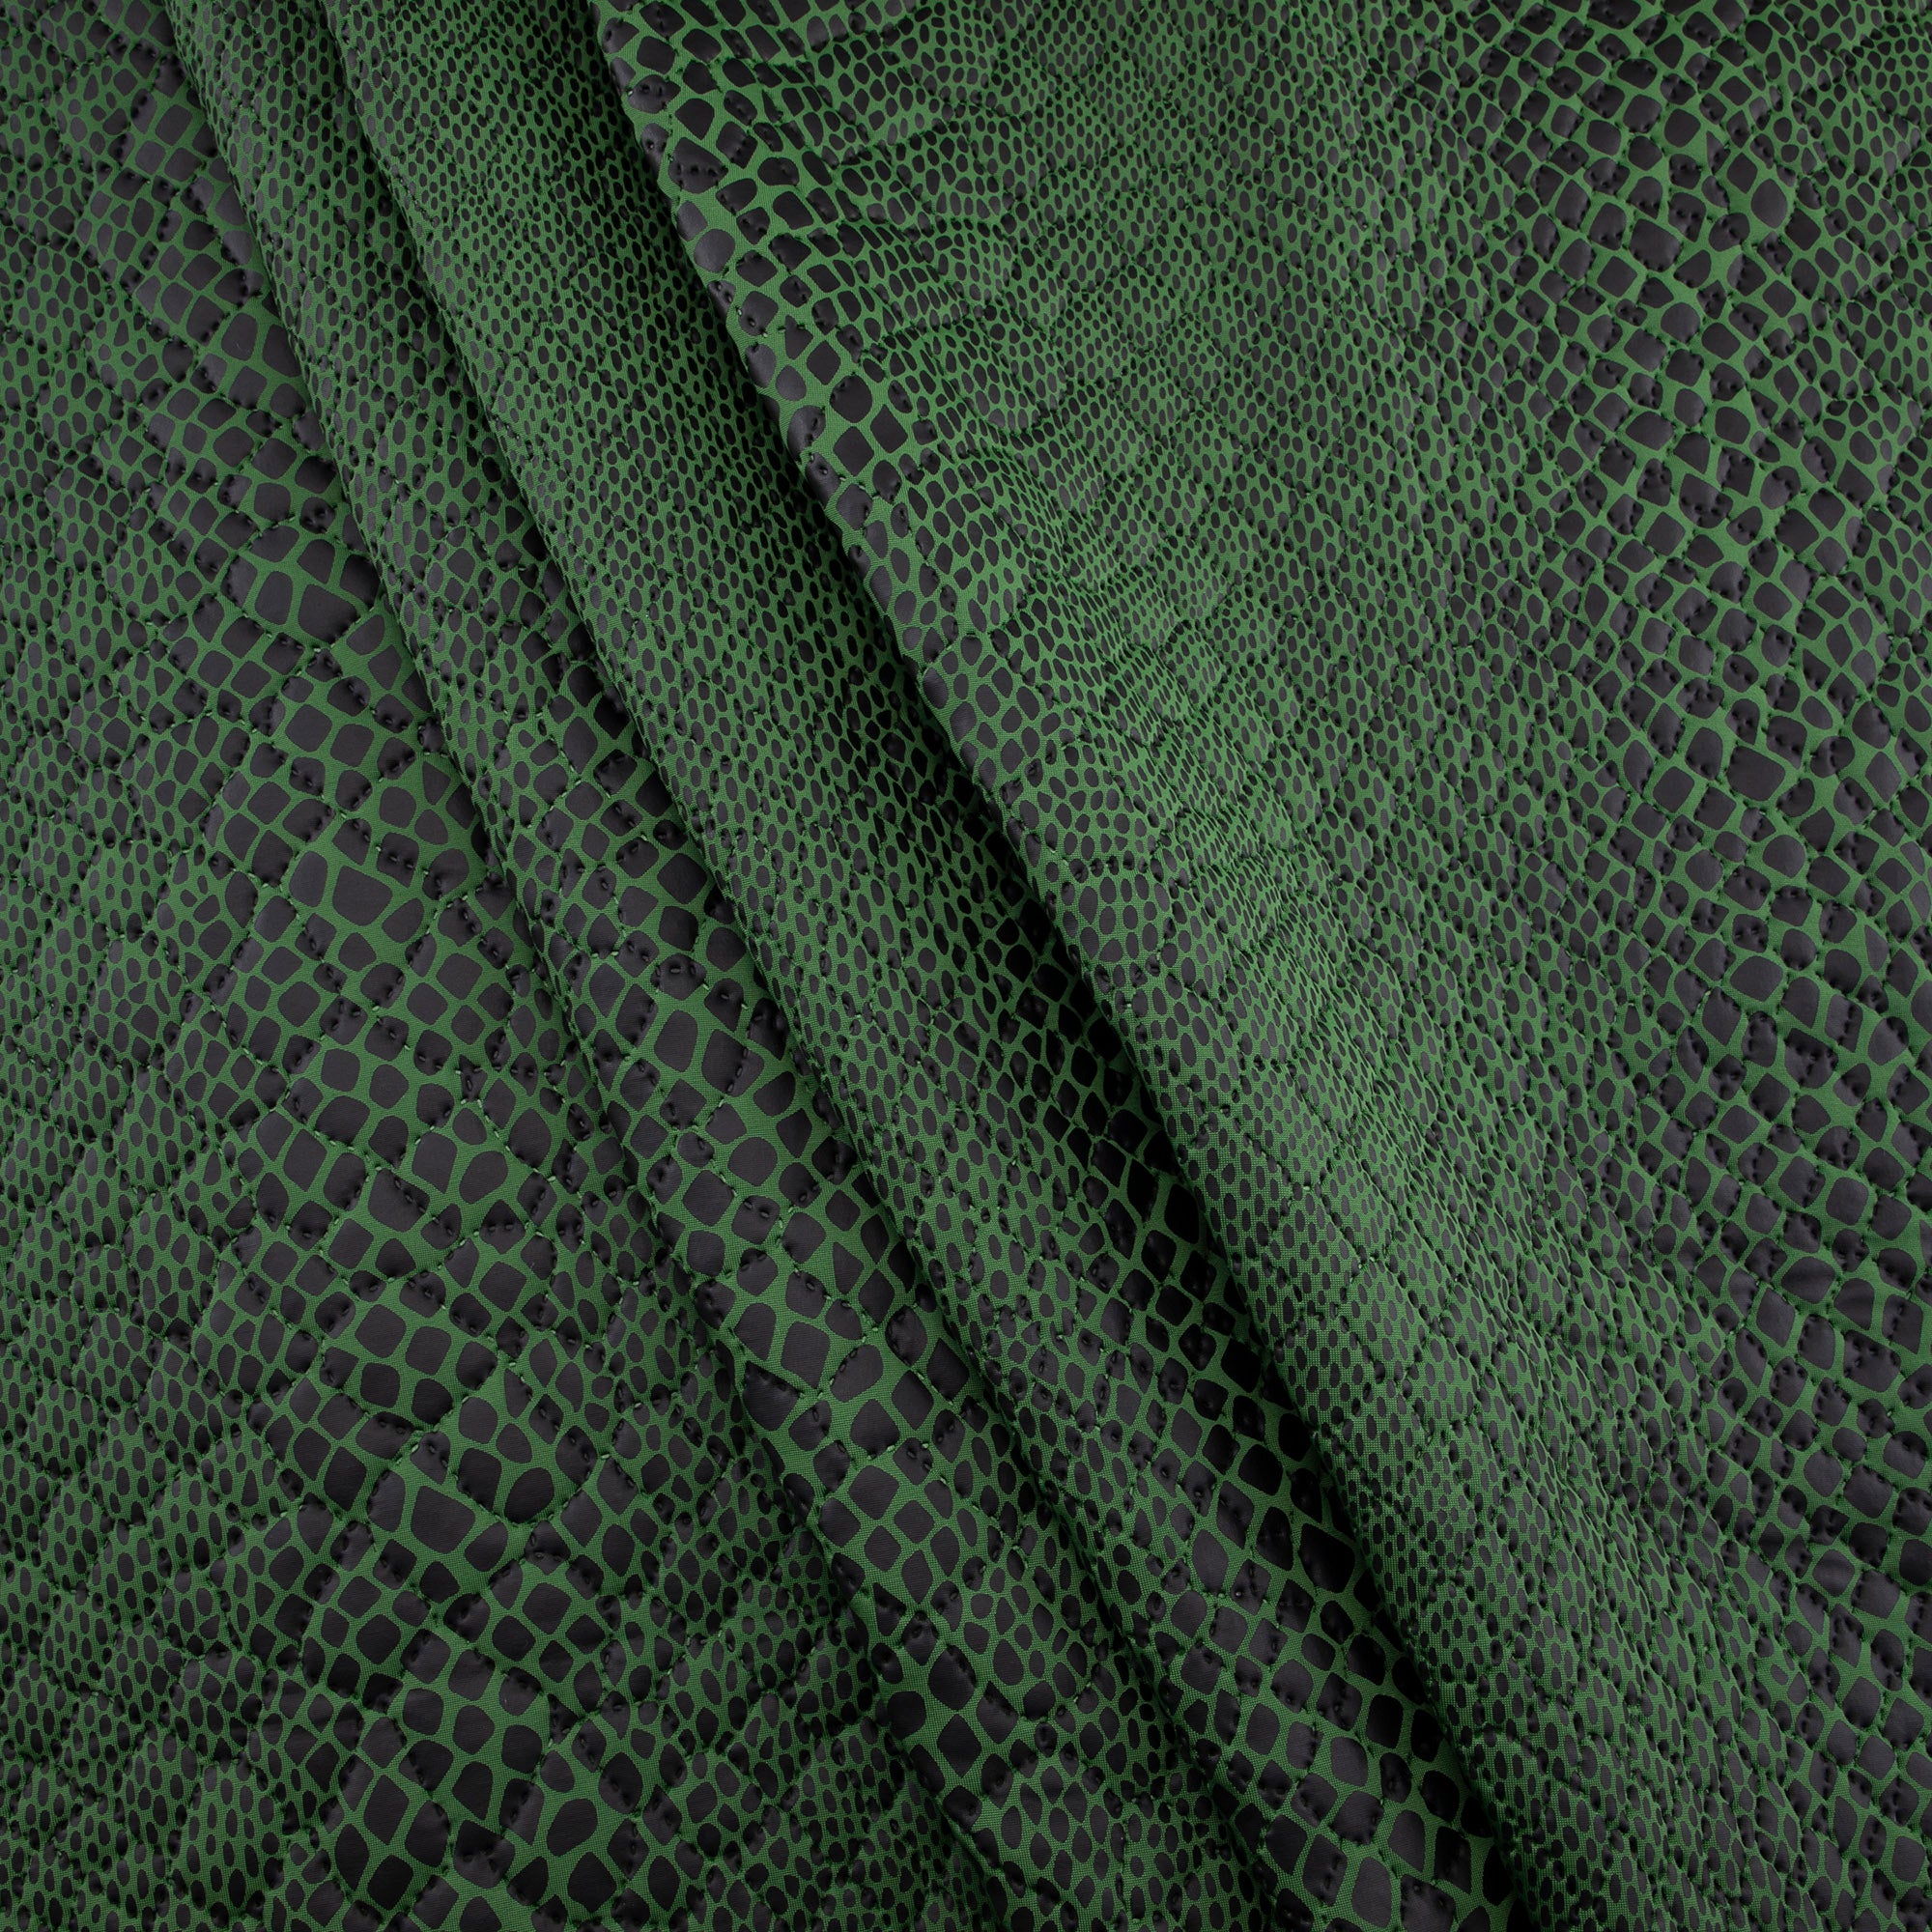 Quilted Fabric, Reptile Print, Green